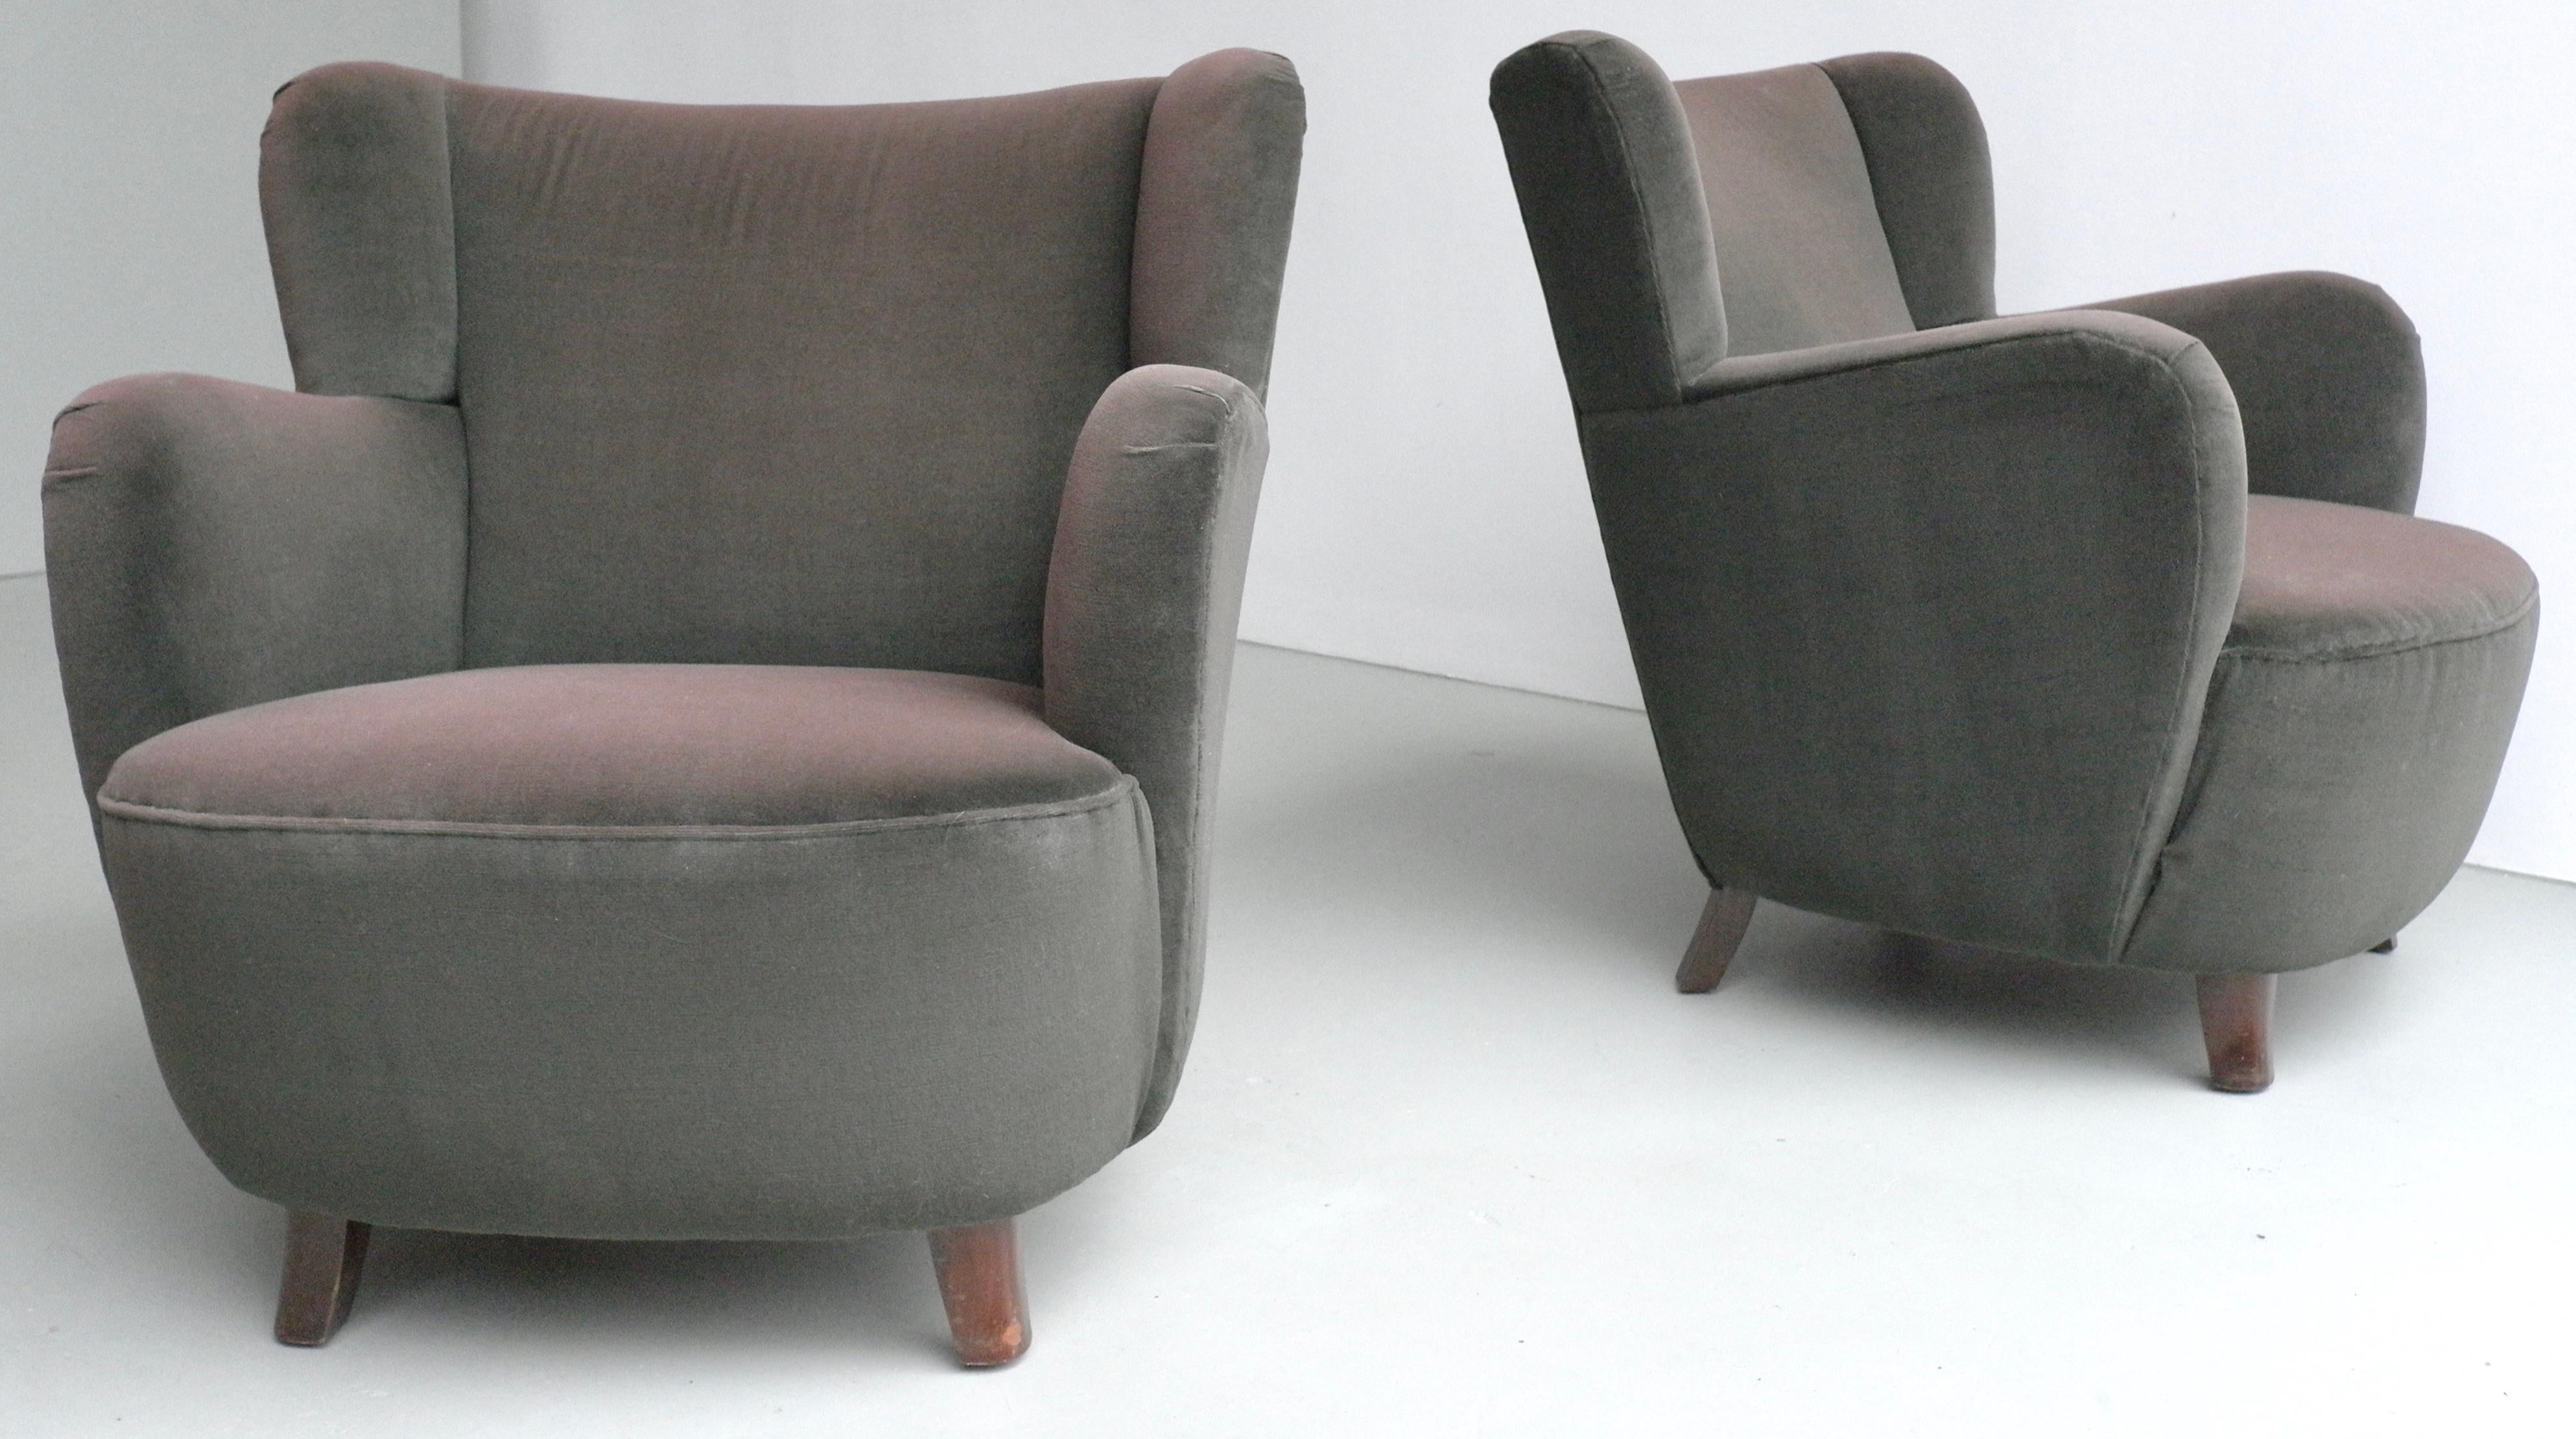 Pair of Mid-Century Modern Danish Lounge Chairs in Brown Eggplant Glow Velvet For Sale 4